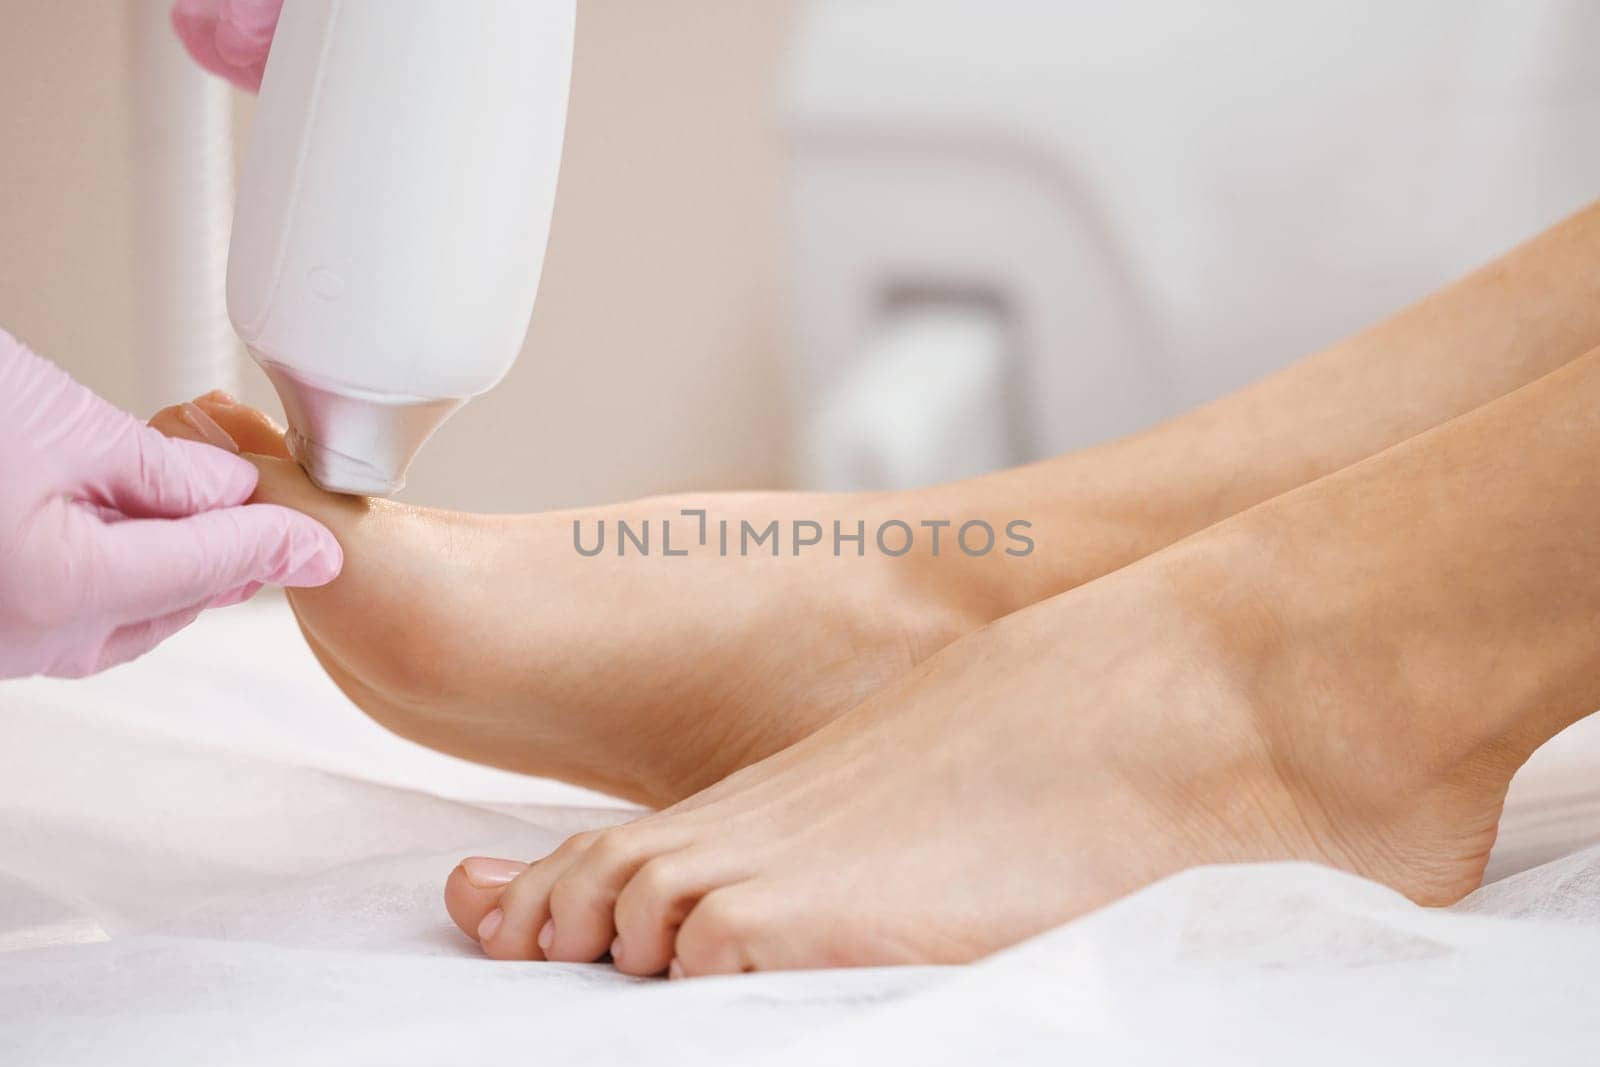 The doctor makes the procedure for the treatment of foot fungus. Patient receiving laser therapy for a toenail. Fungal infection on the nails. Treatment of onychomycosis with a medical laser.